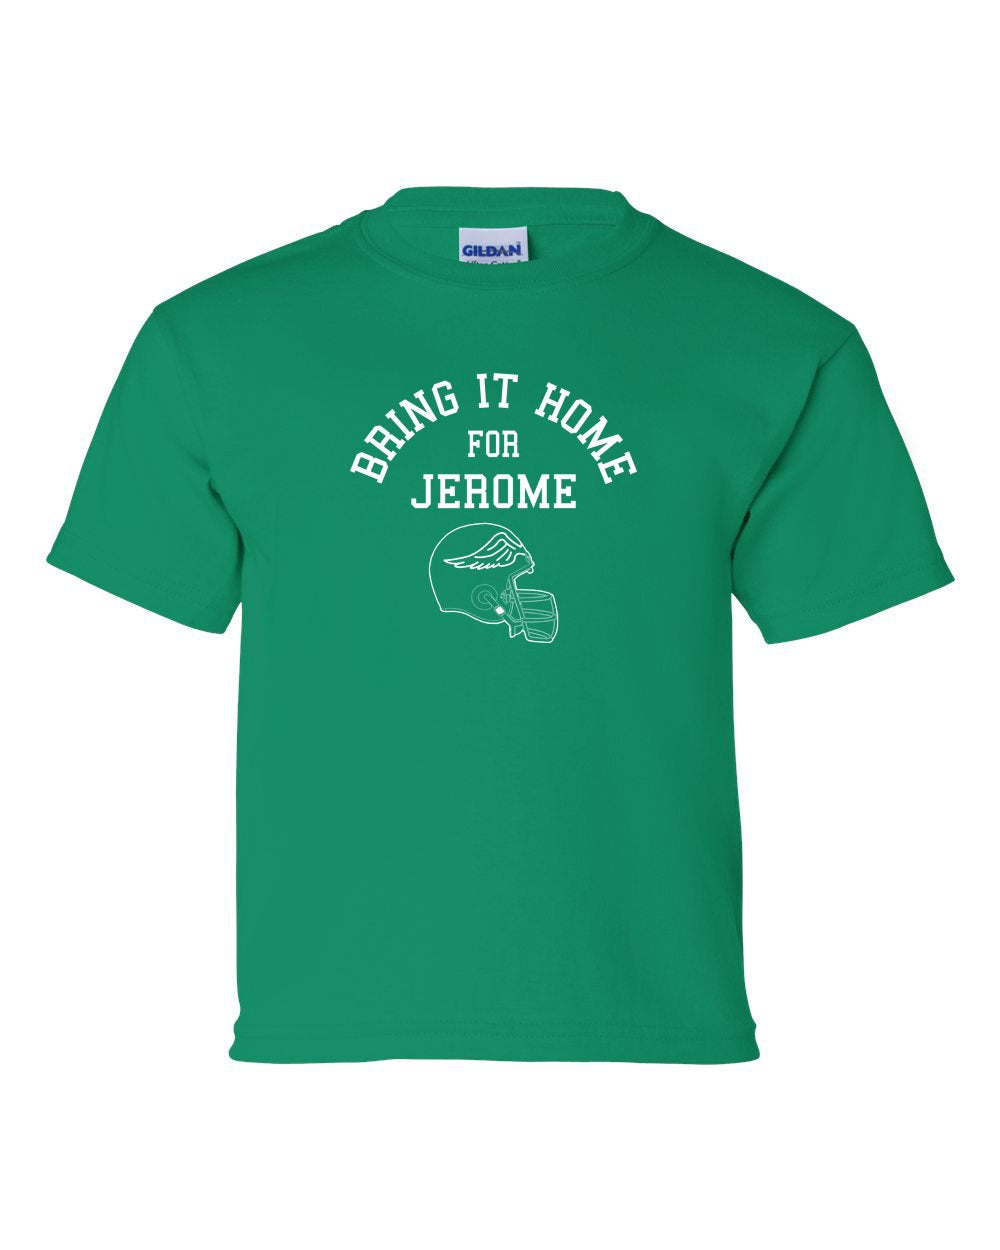 Bring It Home For Jerome KIDS T-Shirt